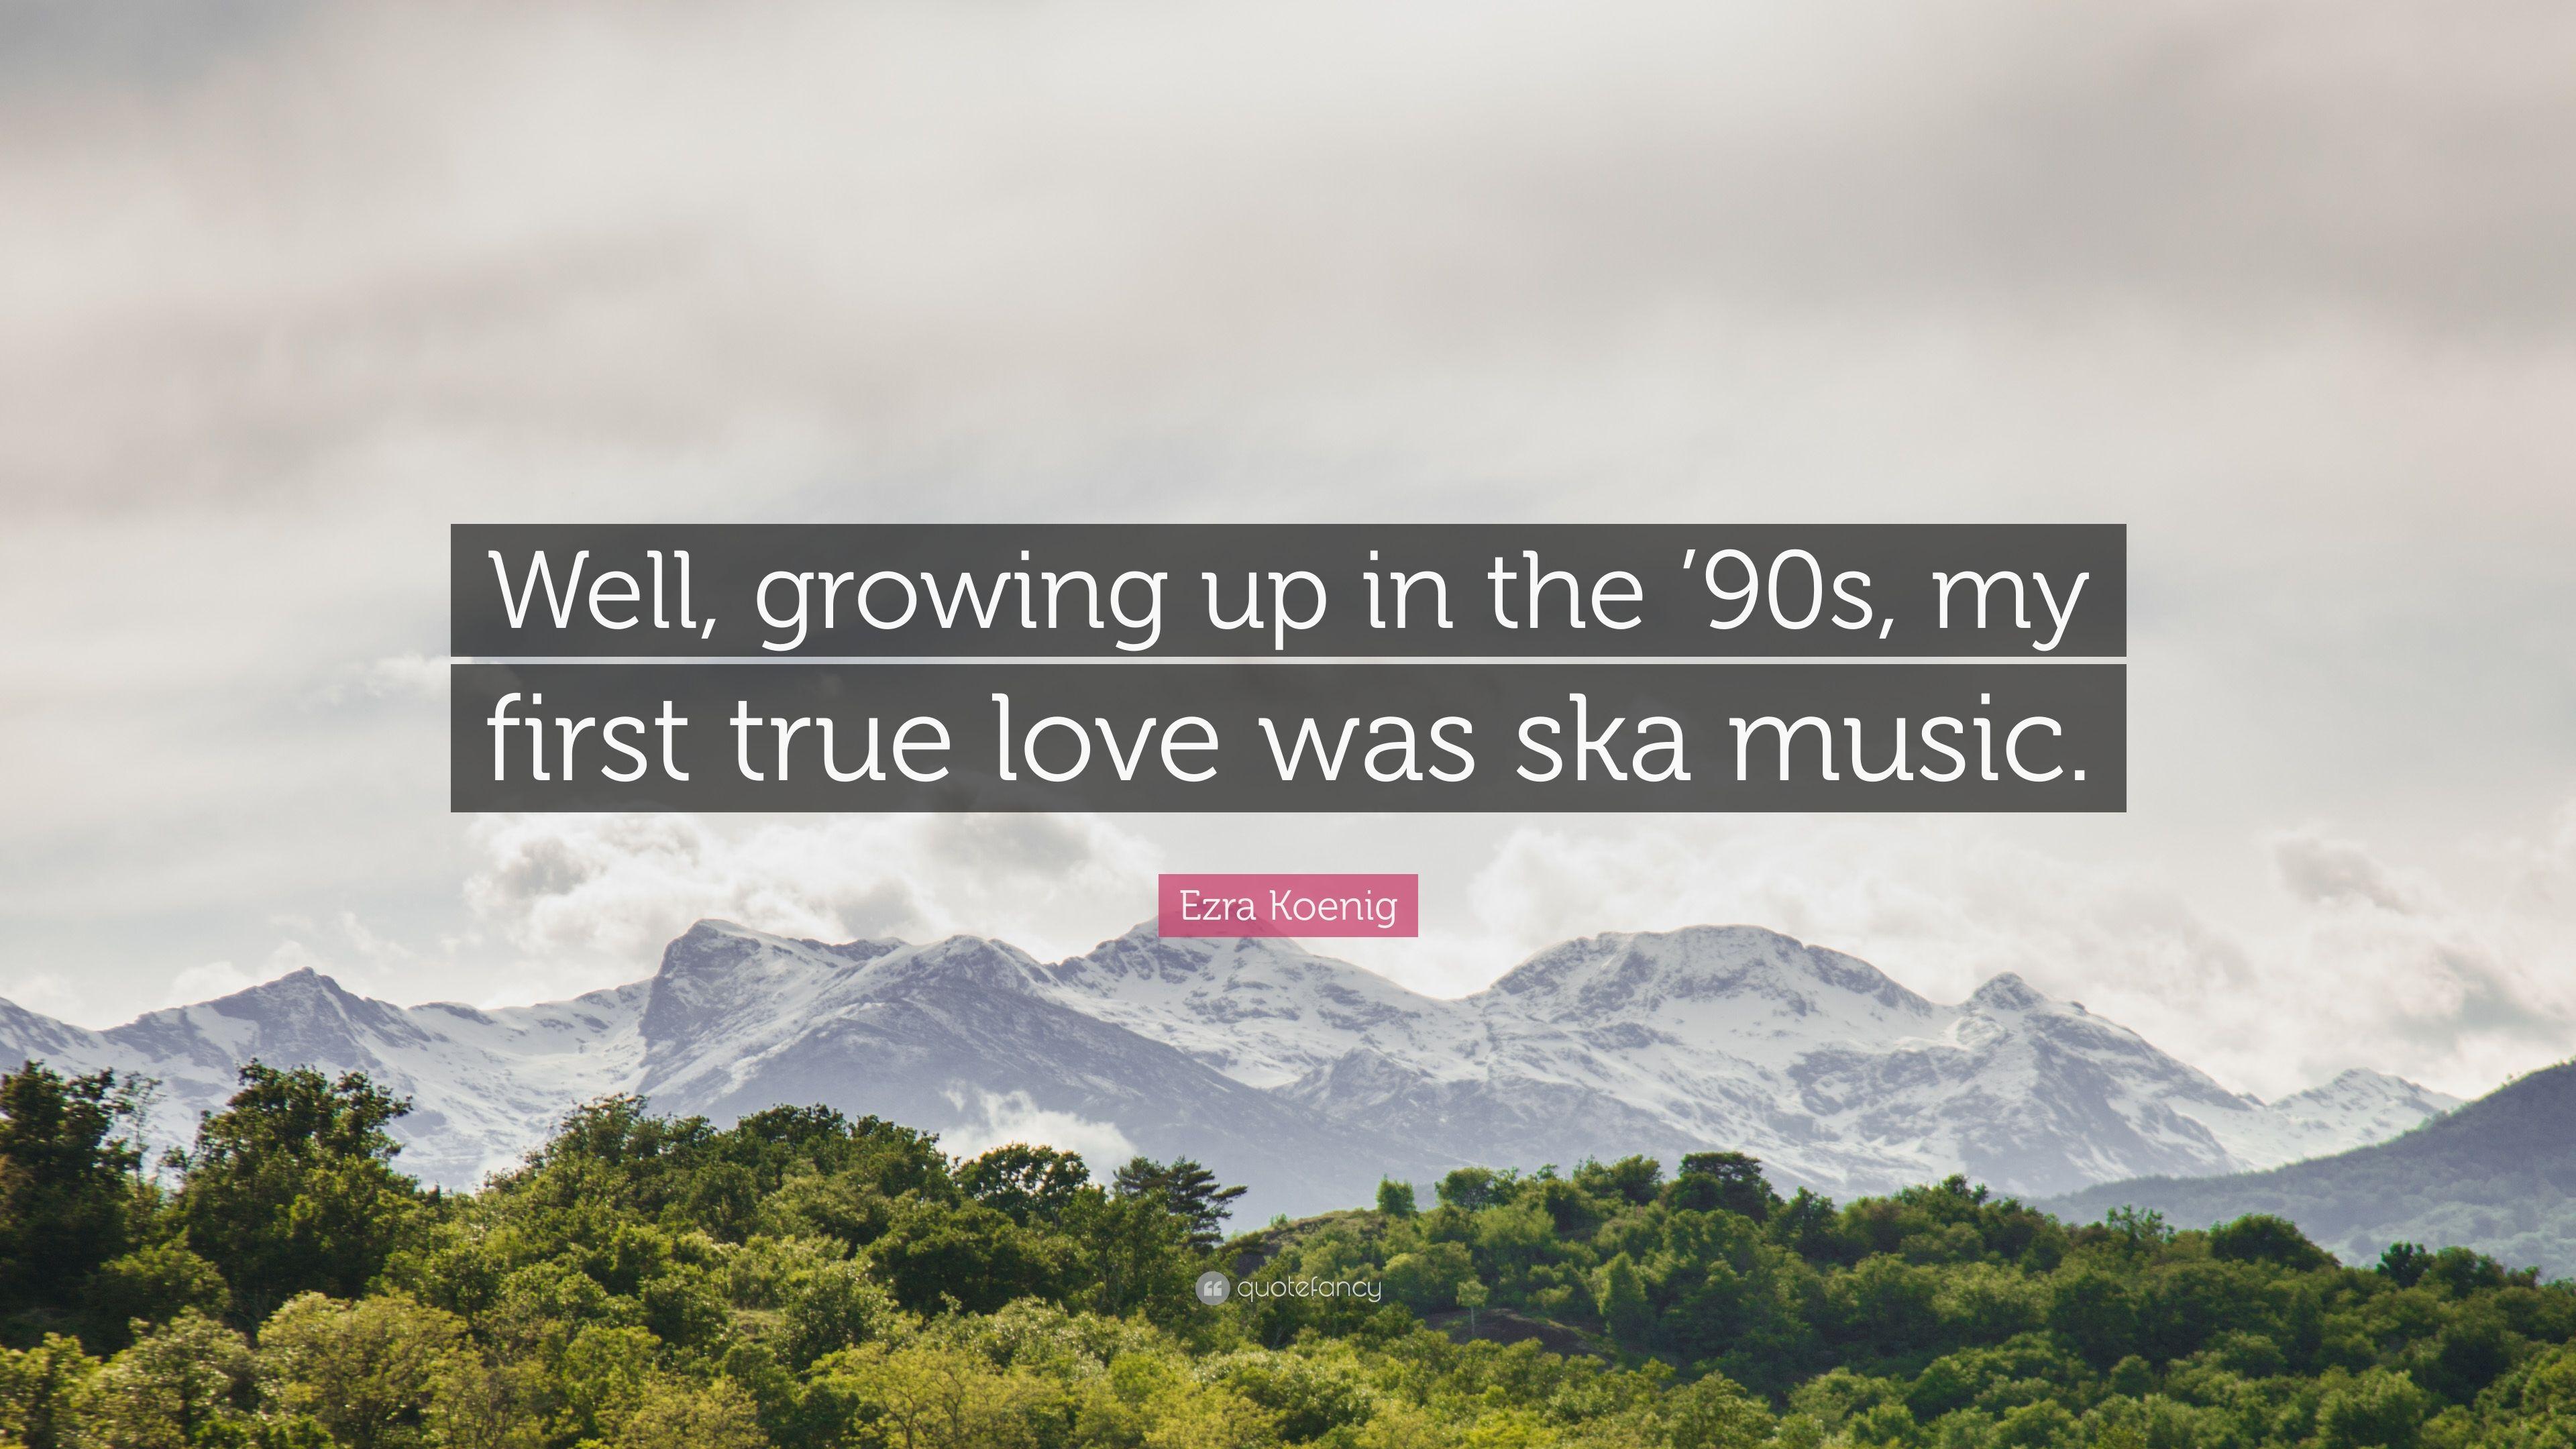 Ezra Koenig Quote: “Well, growing up in the '90s, my first true love